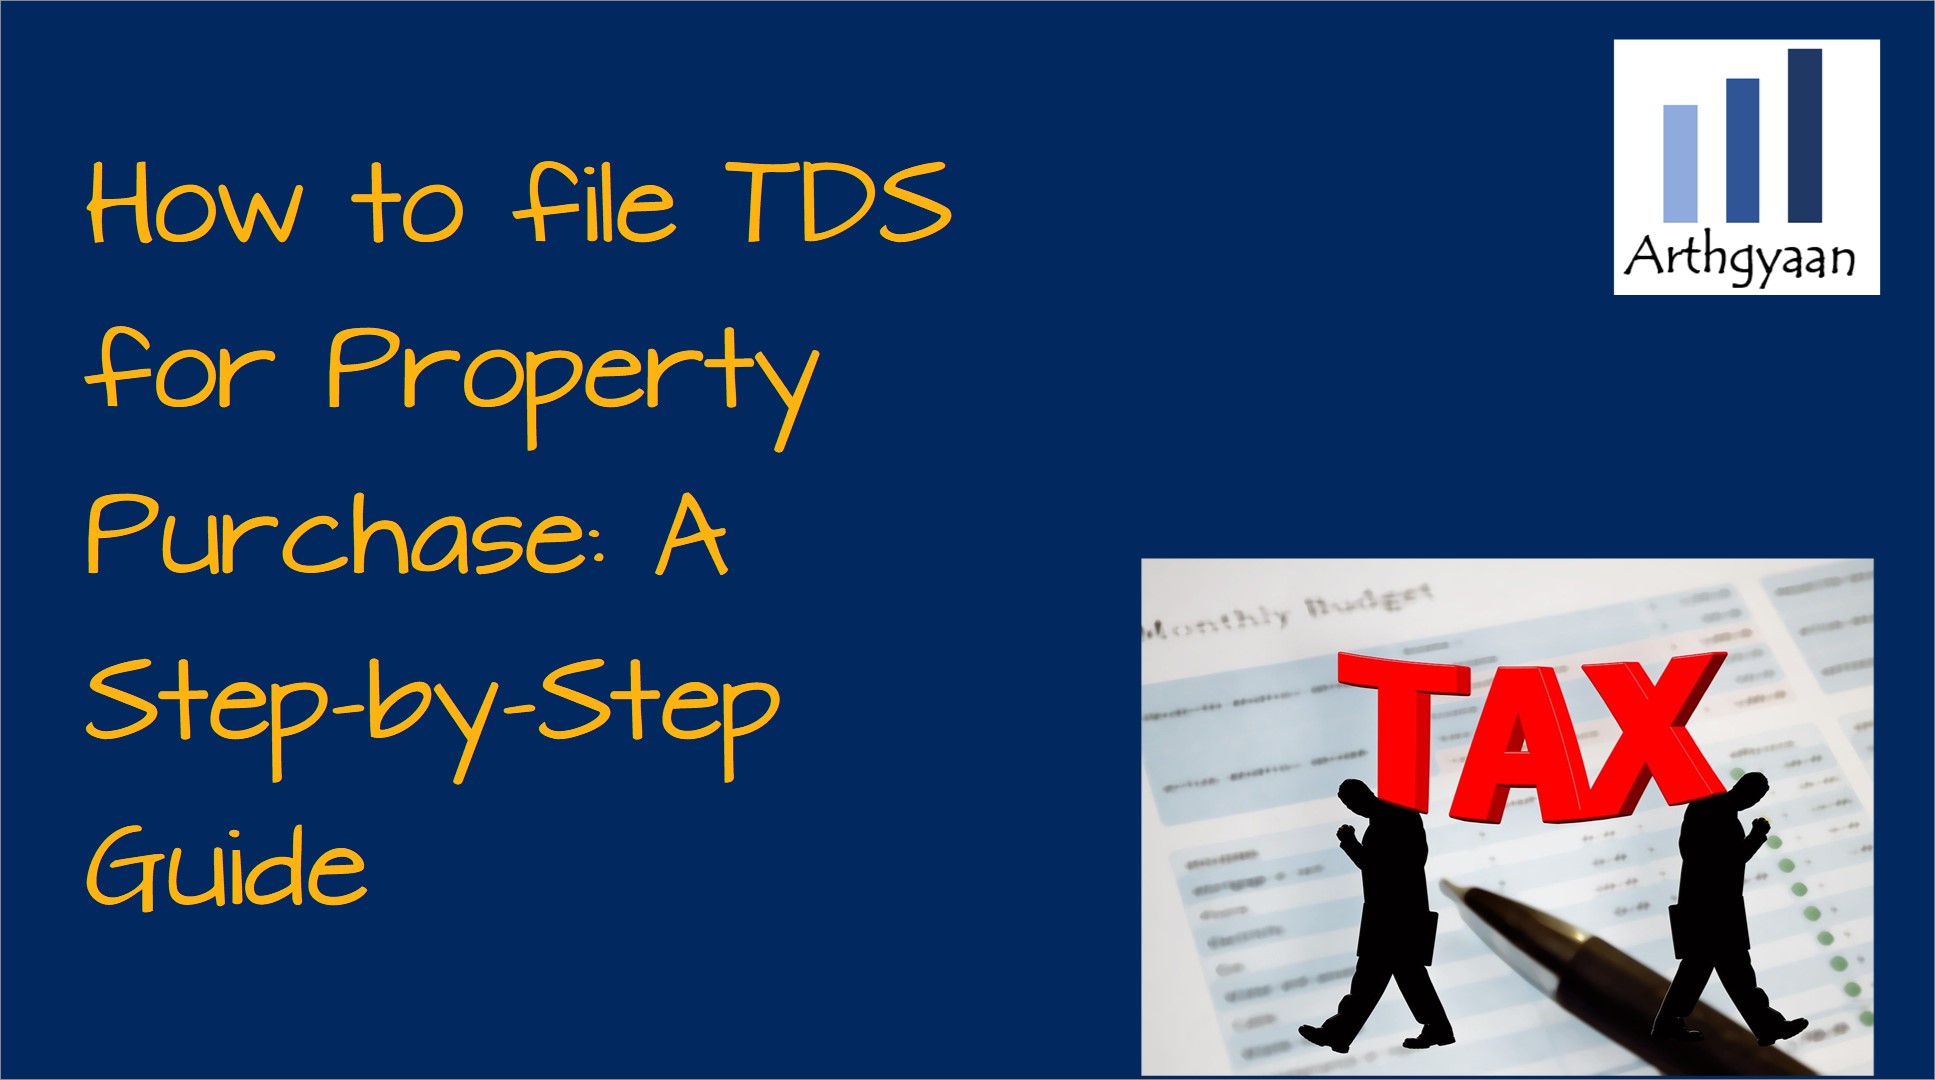 <p>This article explains the steps for paying TDS on purchasing property in an easy step-by-step manner.</p>

